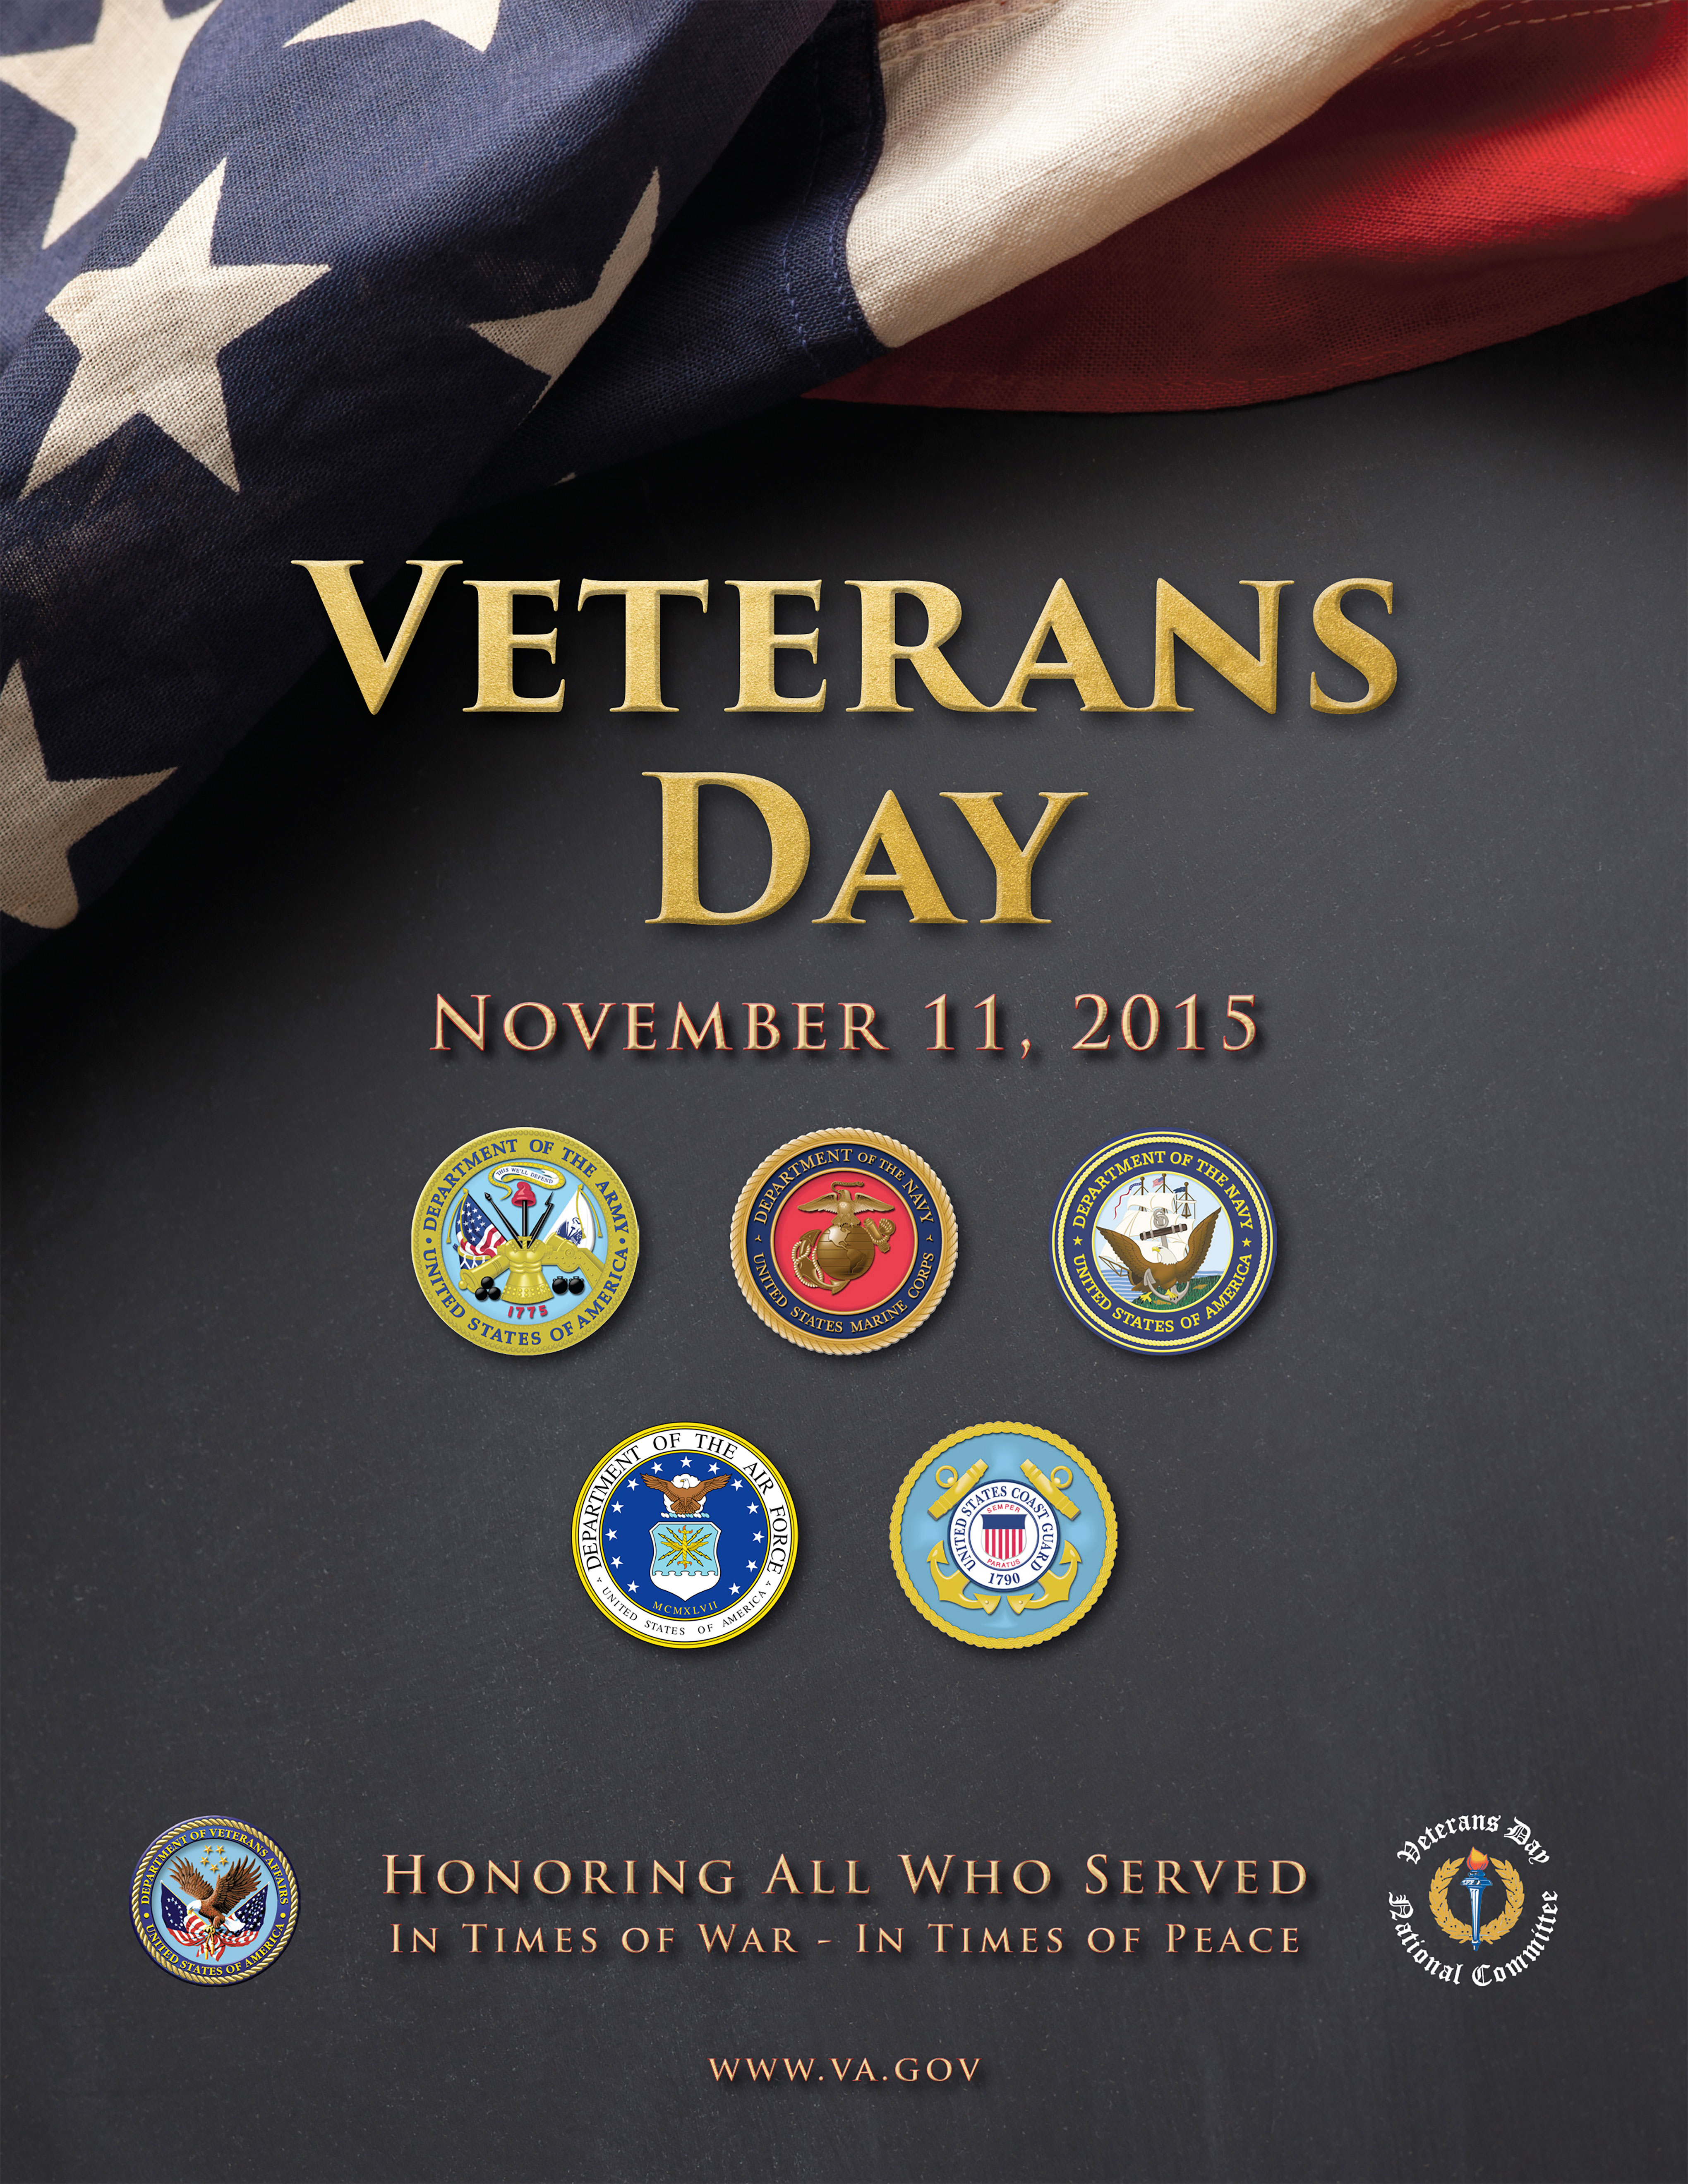 Amazing Veterans Day Pictures & Backgrounds